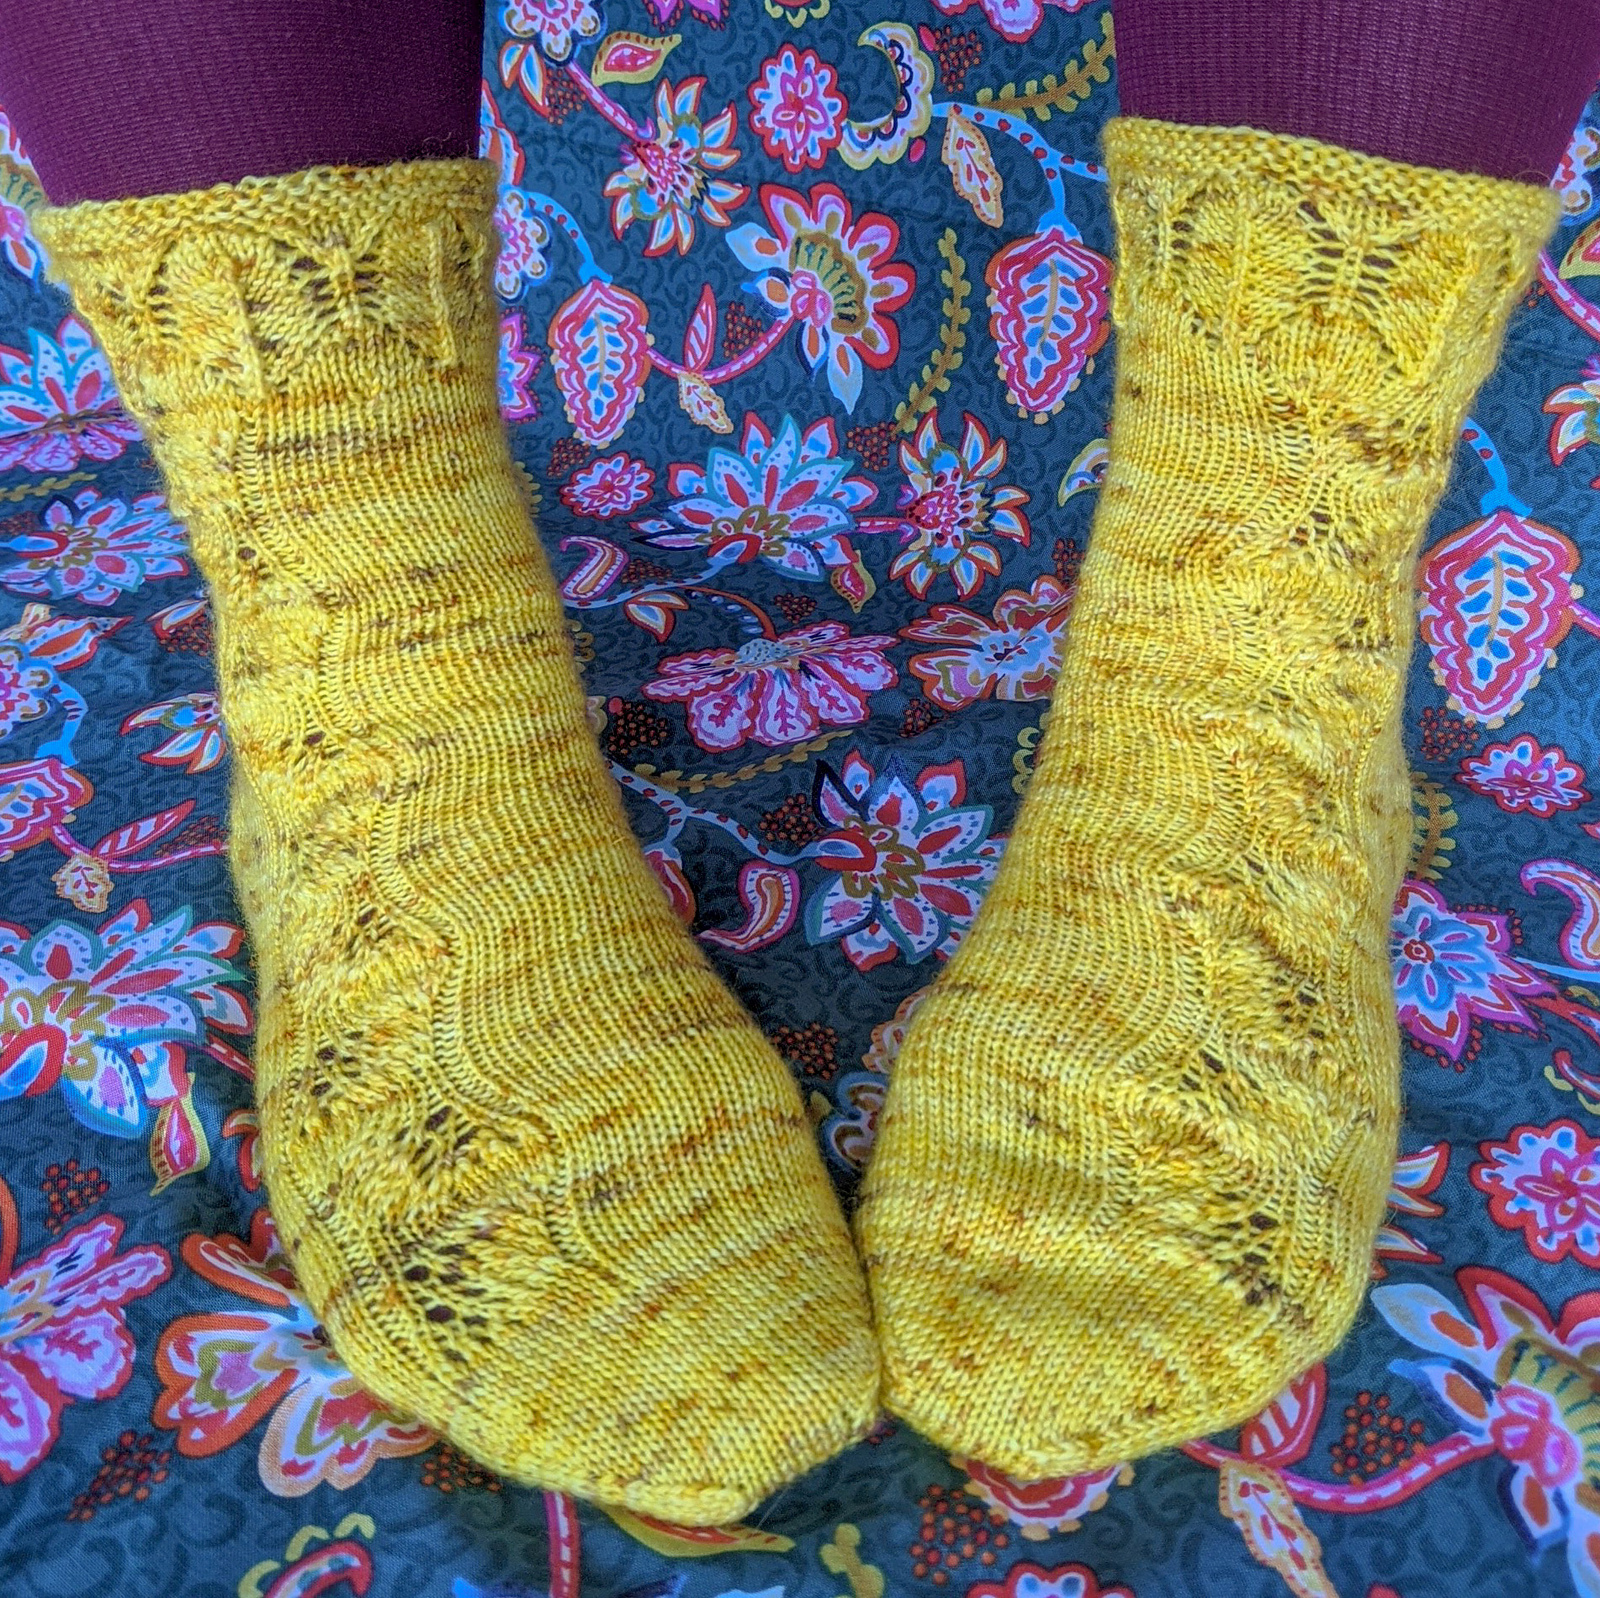 A yellow speckled sock with feather lace encircling the cuff and continuing in a single column along the instep.